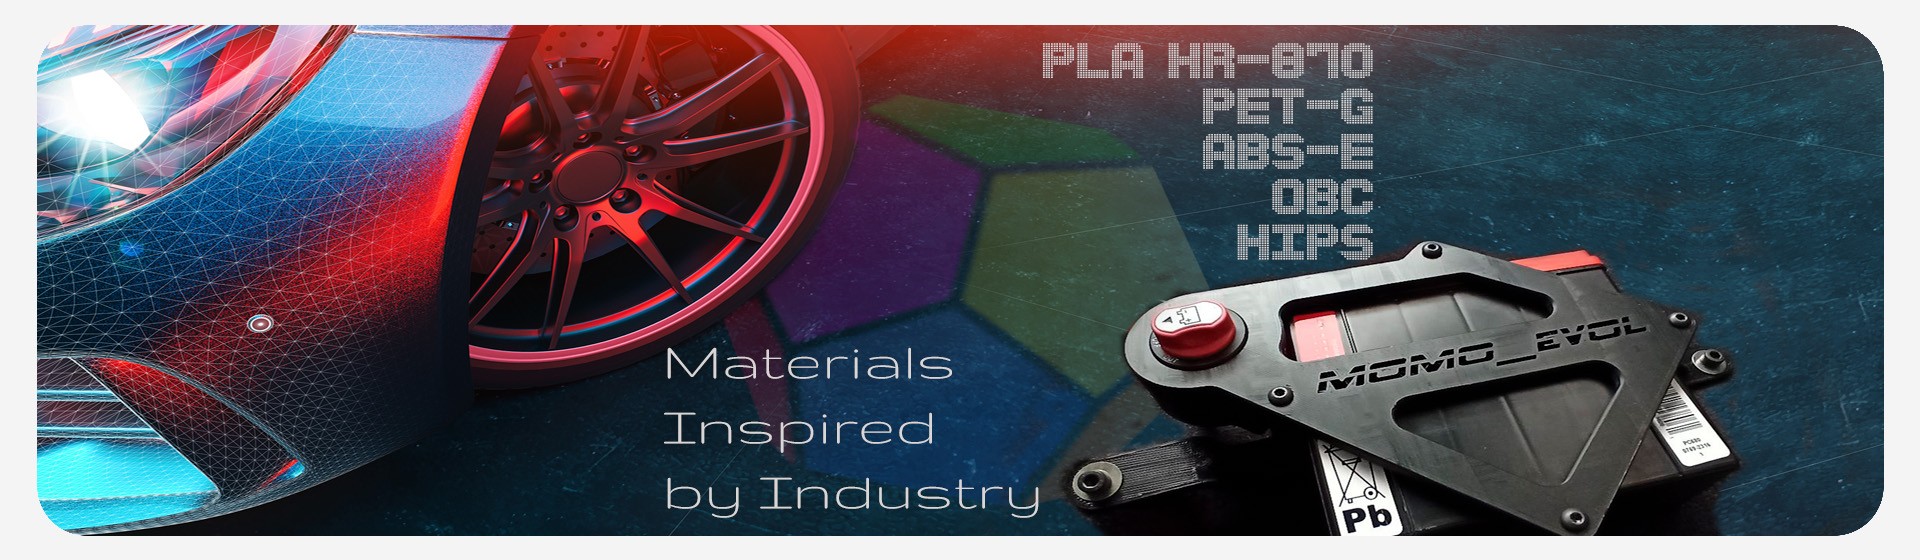 Materials Inspired by Industry